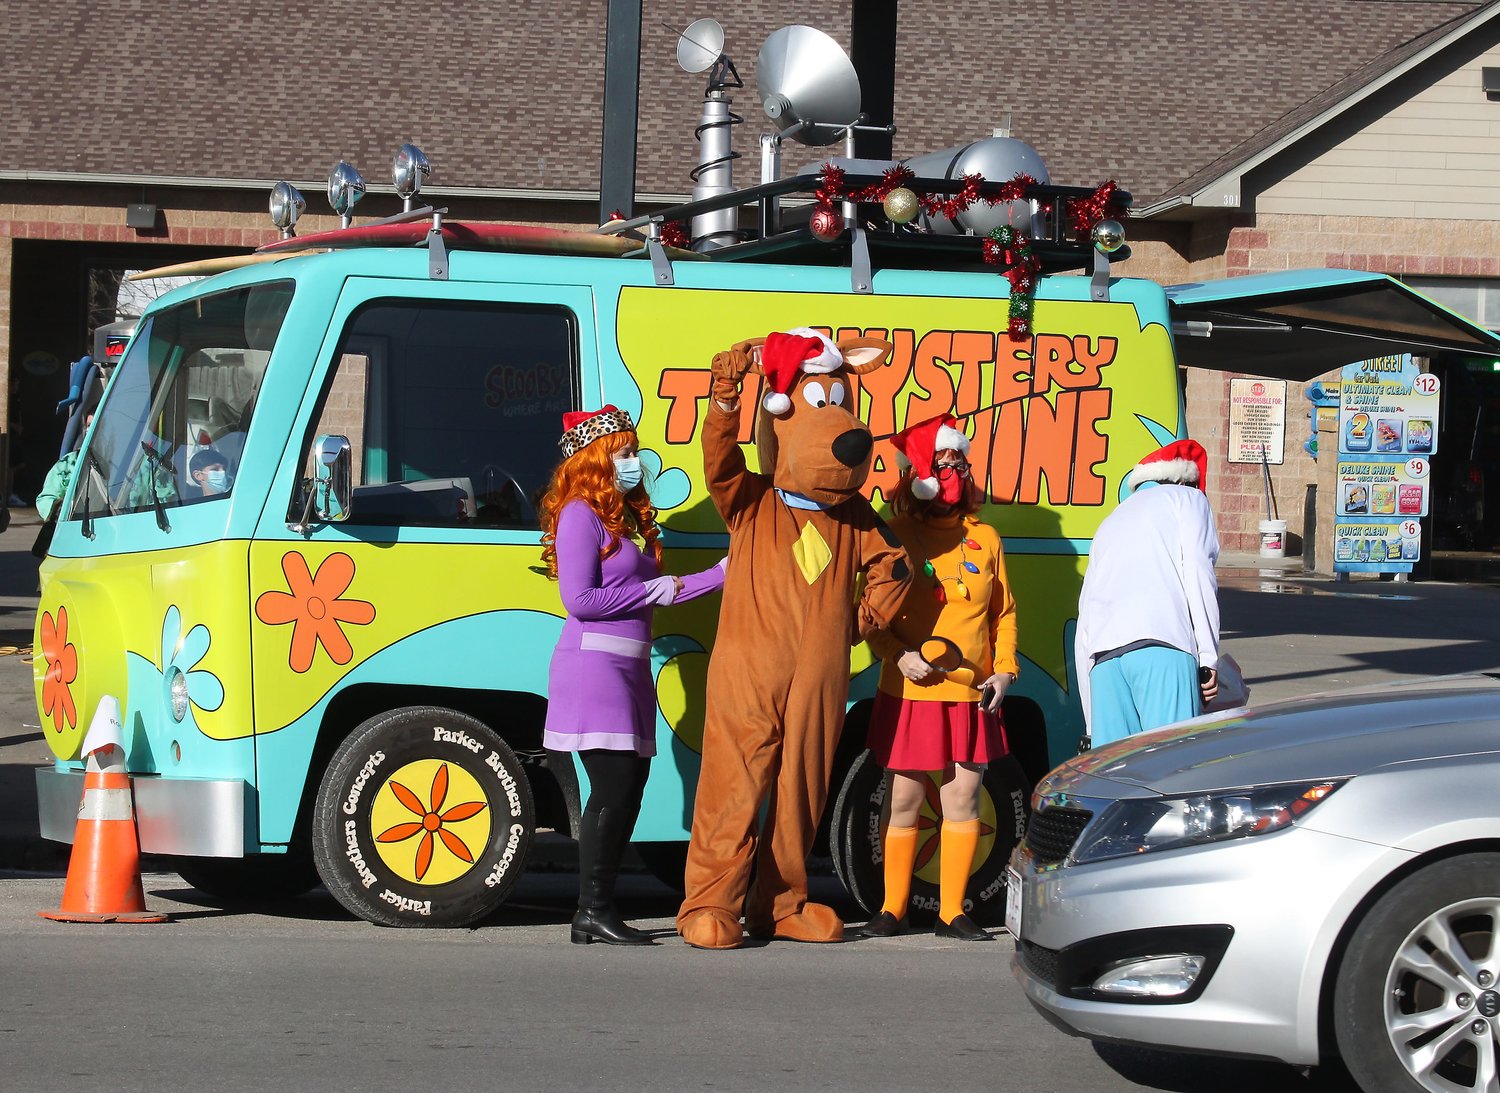 &lt;br /&gt;
&lt;strong&gt;Children&amp;#39;s cartoon character Scooby Doo waves at a motorist while fellow costumed characters Velma and , right, and Daphne, left, stand with Scooby in front of the Mystery Machine van. The display was one of about 9 entries in Moberly&amp;#39;s 2020 Reverse Christmas Parade held Dec. 5 in the downtown business district. Due to COVID-related restrictions, the event forced organizers to have motorists drive by and persons to walk by to see the parade entries in lieu of a traditional motorcade and march through the Reed and Coates streets.&lt;/strong&gt;&lt;br /&gt;
&lt;br /&gt;
(Photos by Chuck Embree)